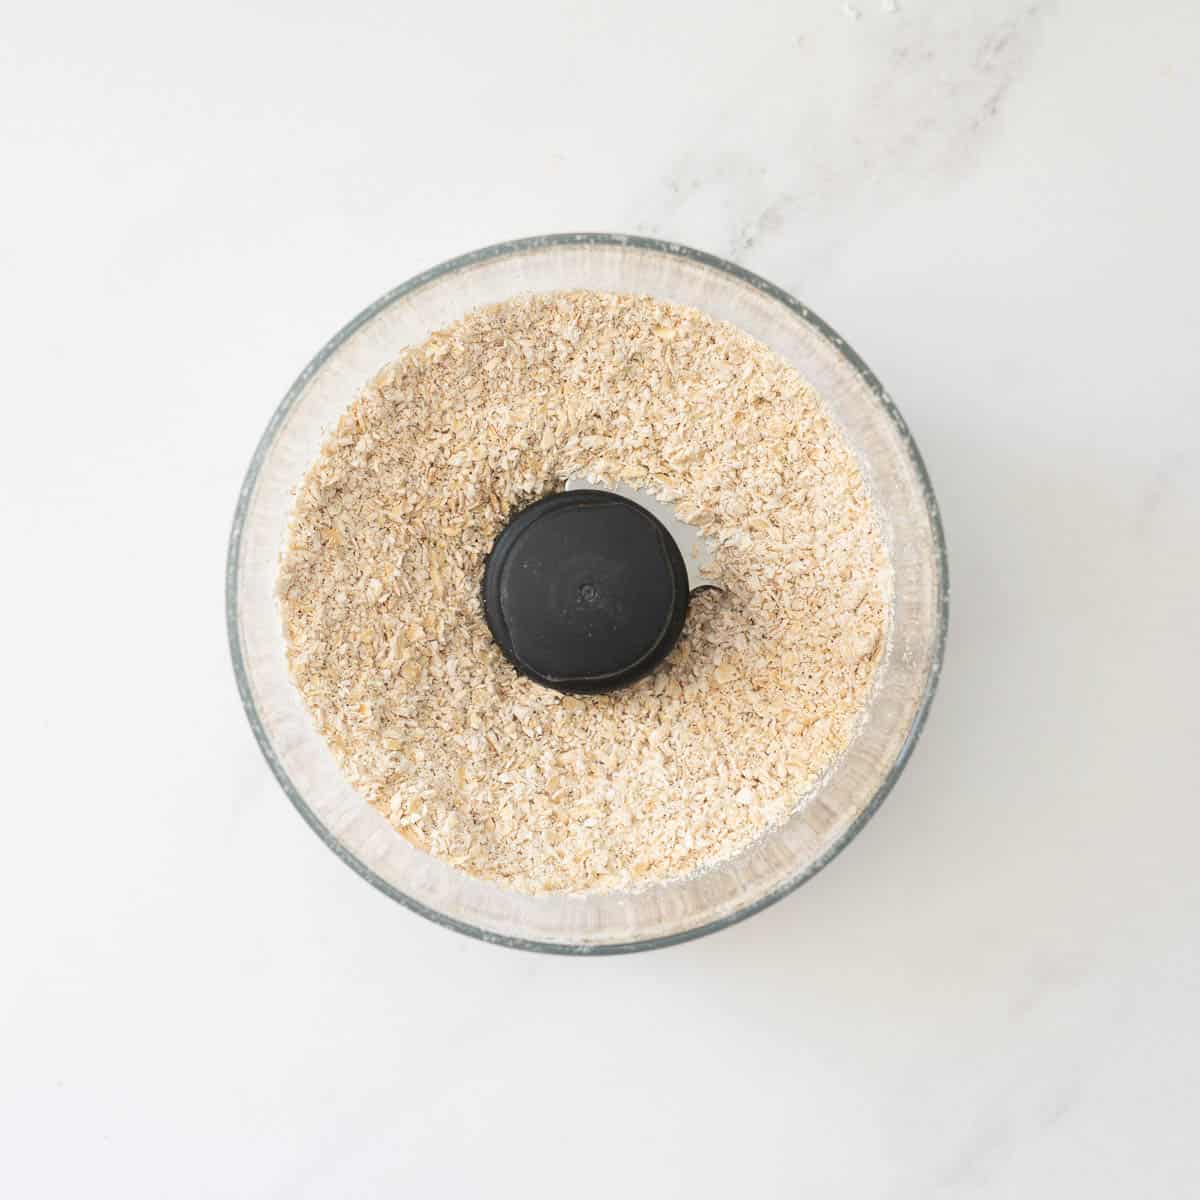 Ground rolled oats in a food processor bowl. 